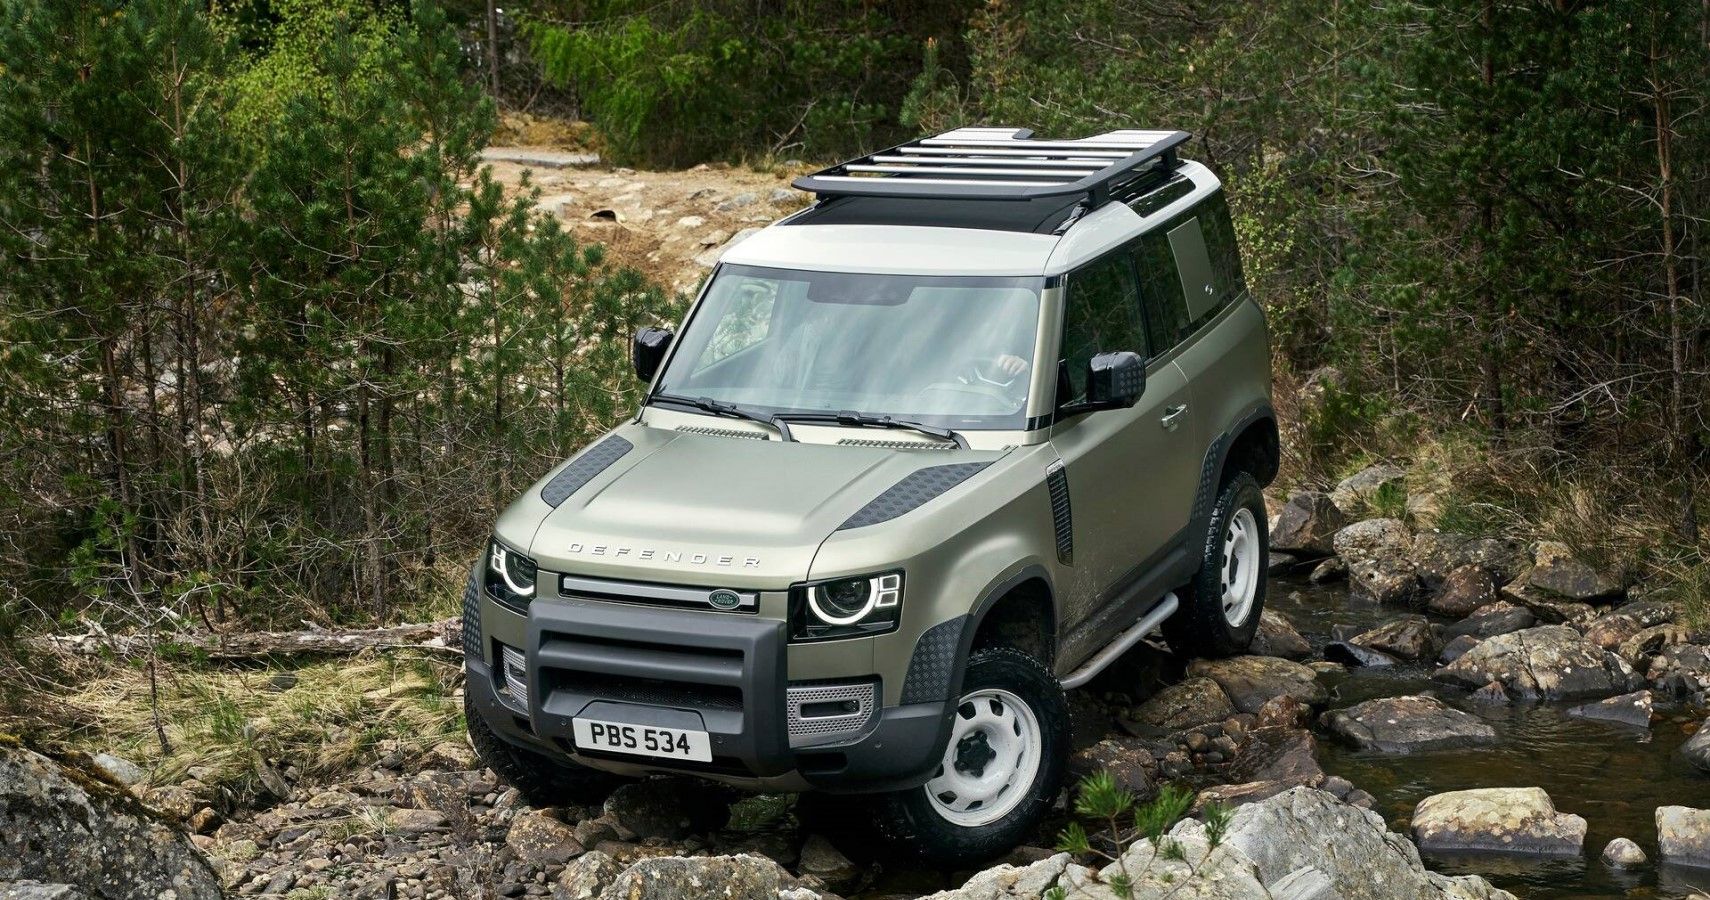 2021 Land Rover Defender front third quarter off-roading view